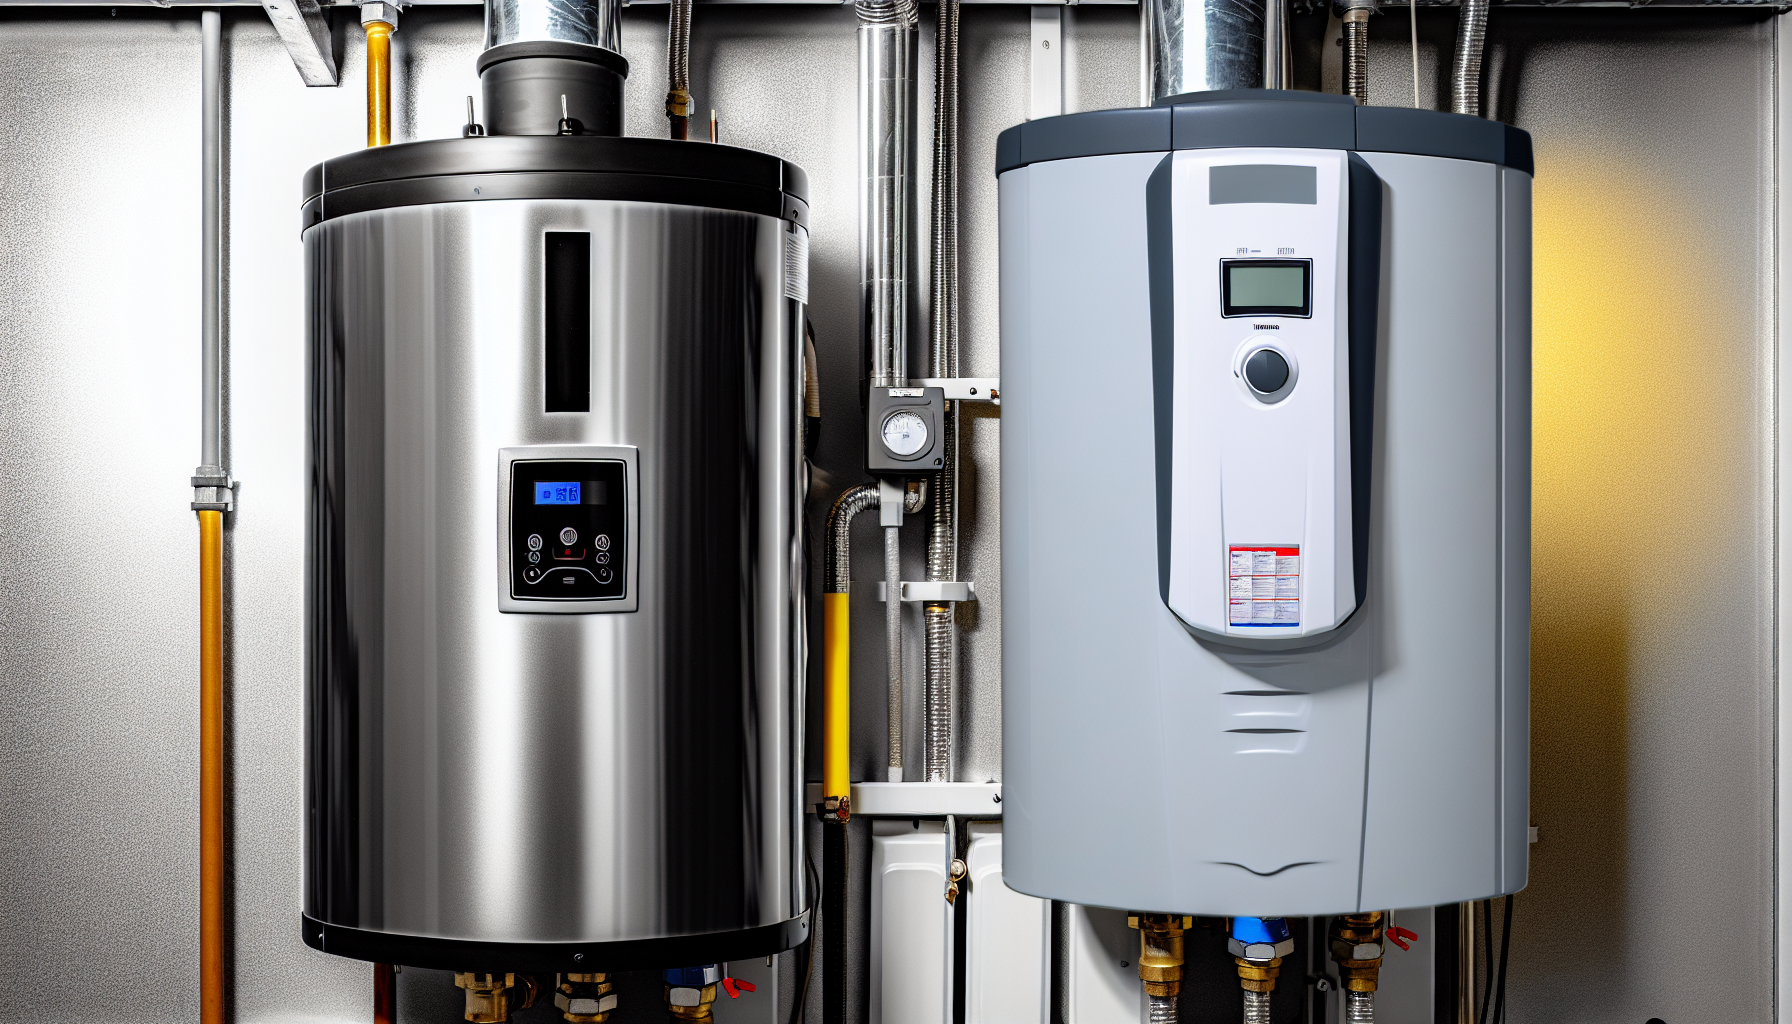 Photo of a heat pump water heater next to a conventional electric water heater